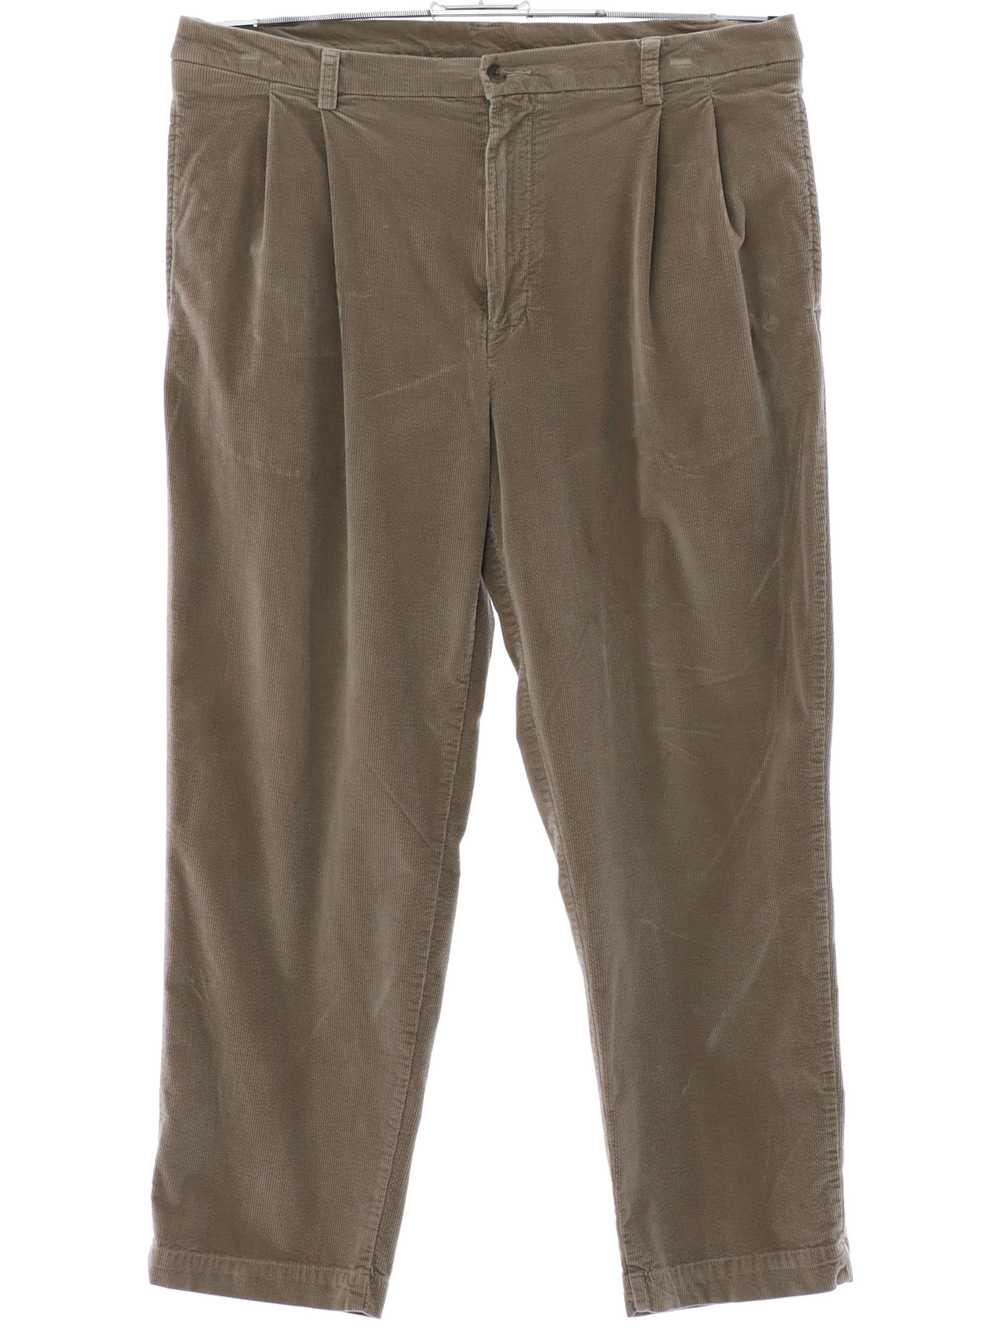 1990's RoundTree and Yorke Mens Pleated Corduroy Pants - Gem